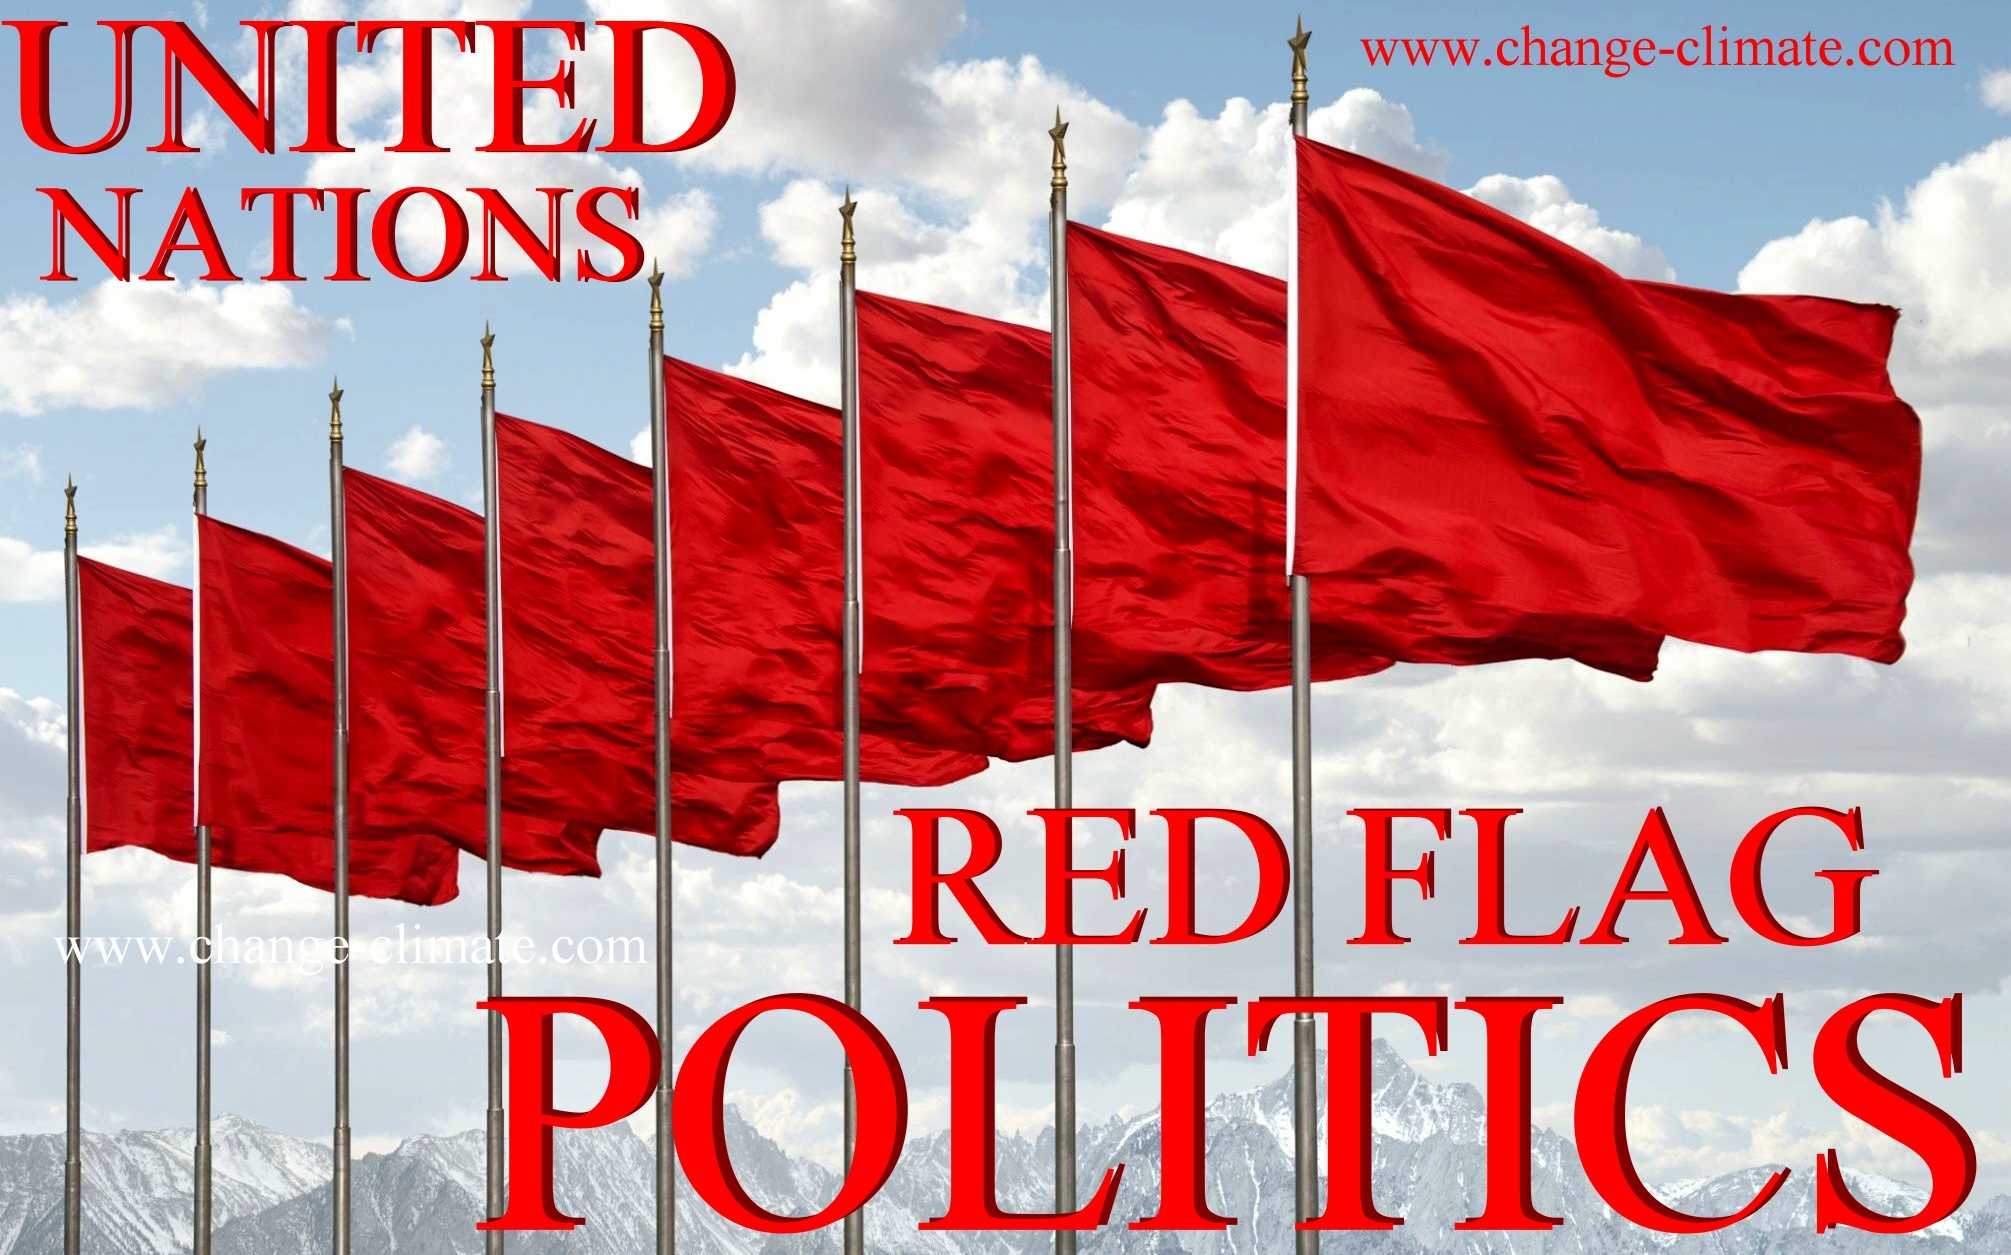 Red flag politics stinks to high heaven of collusion, where clean organizations are open and transparent